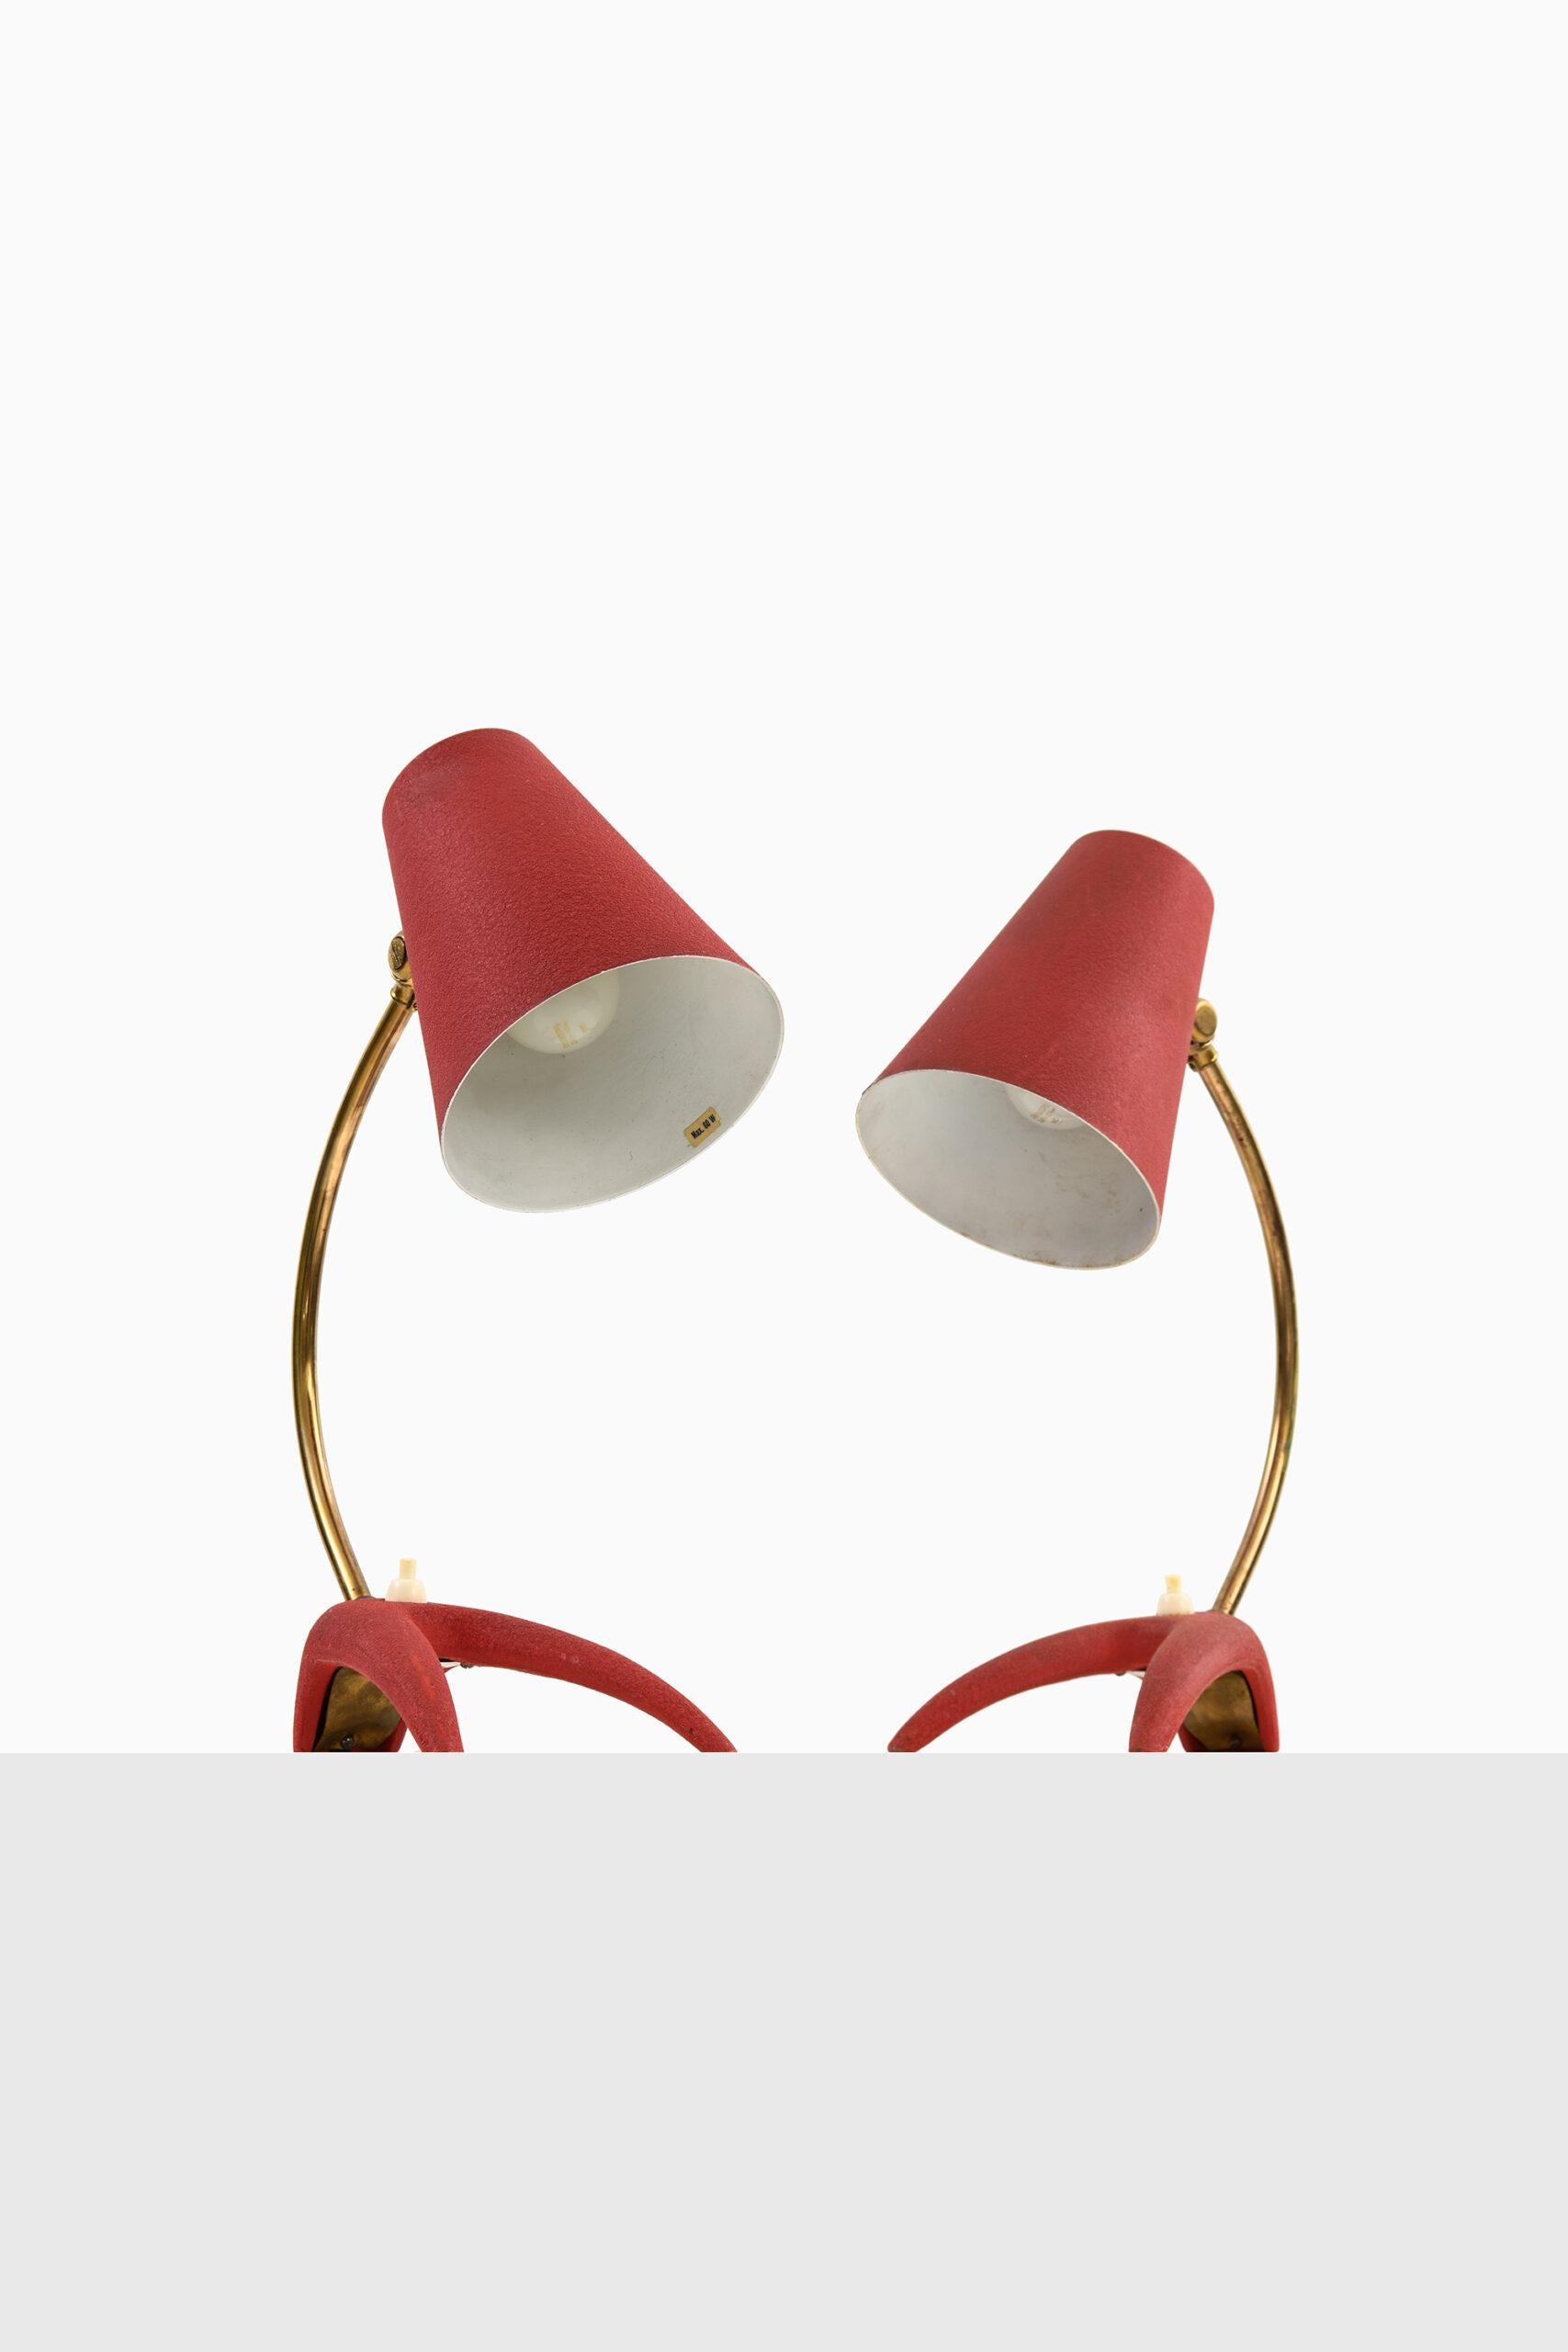 Rare pair of table lamps by unknown designer. Produced by EWÅ in Sweden.